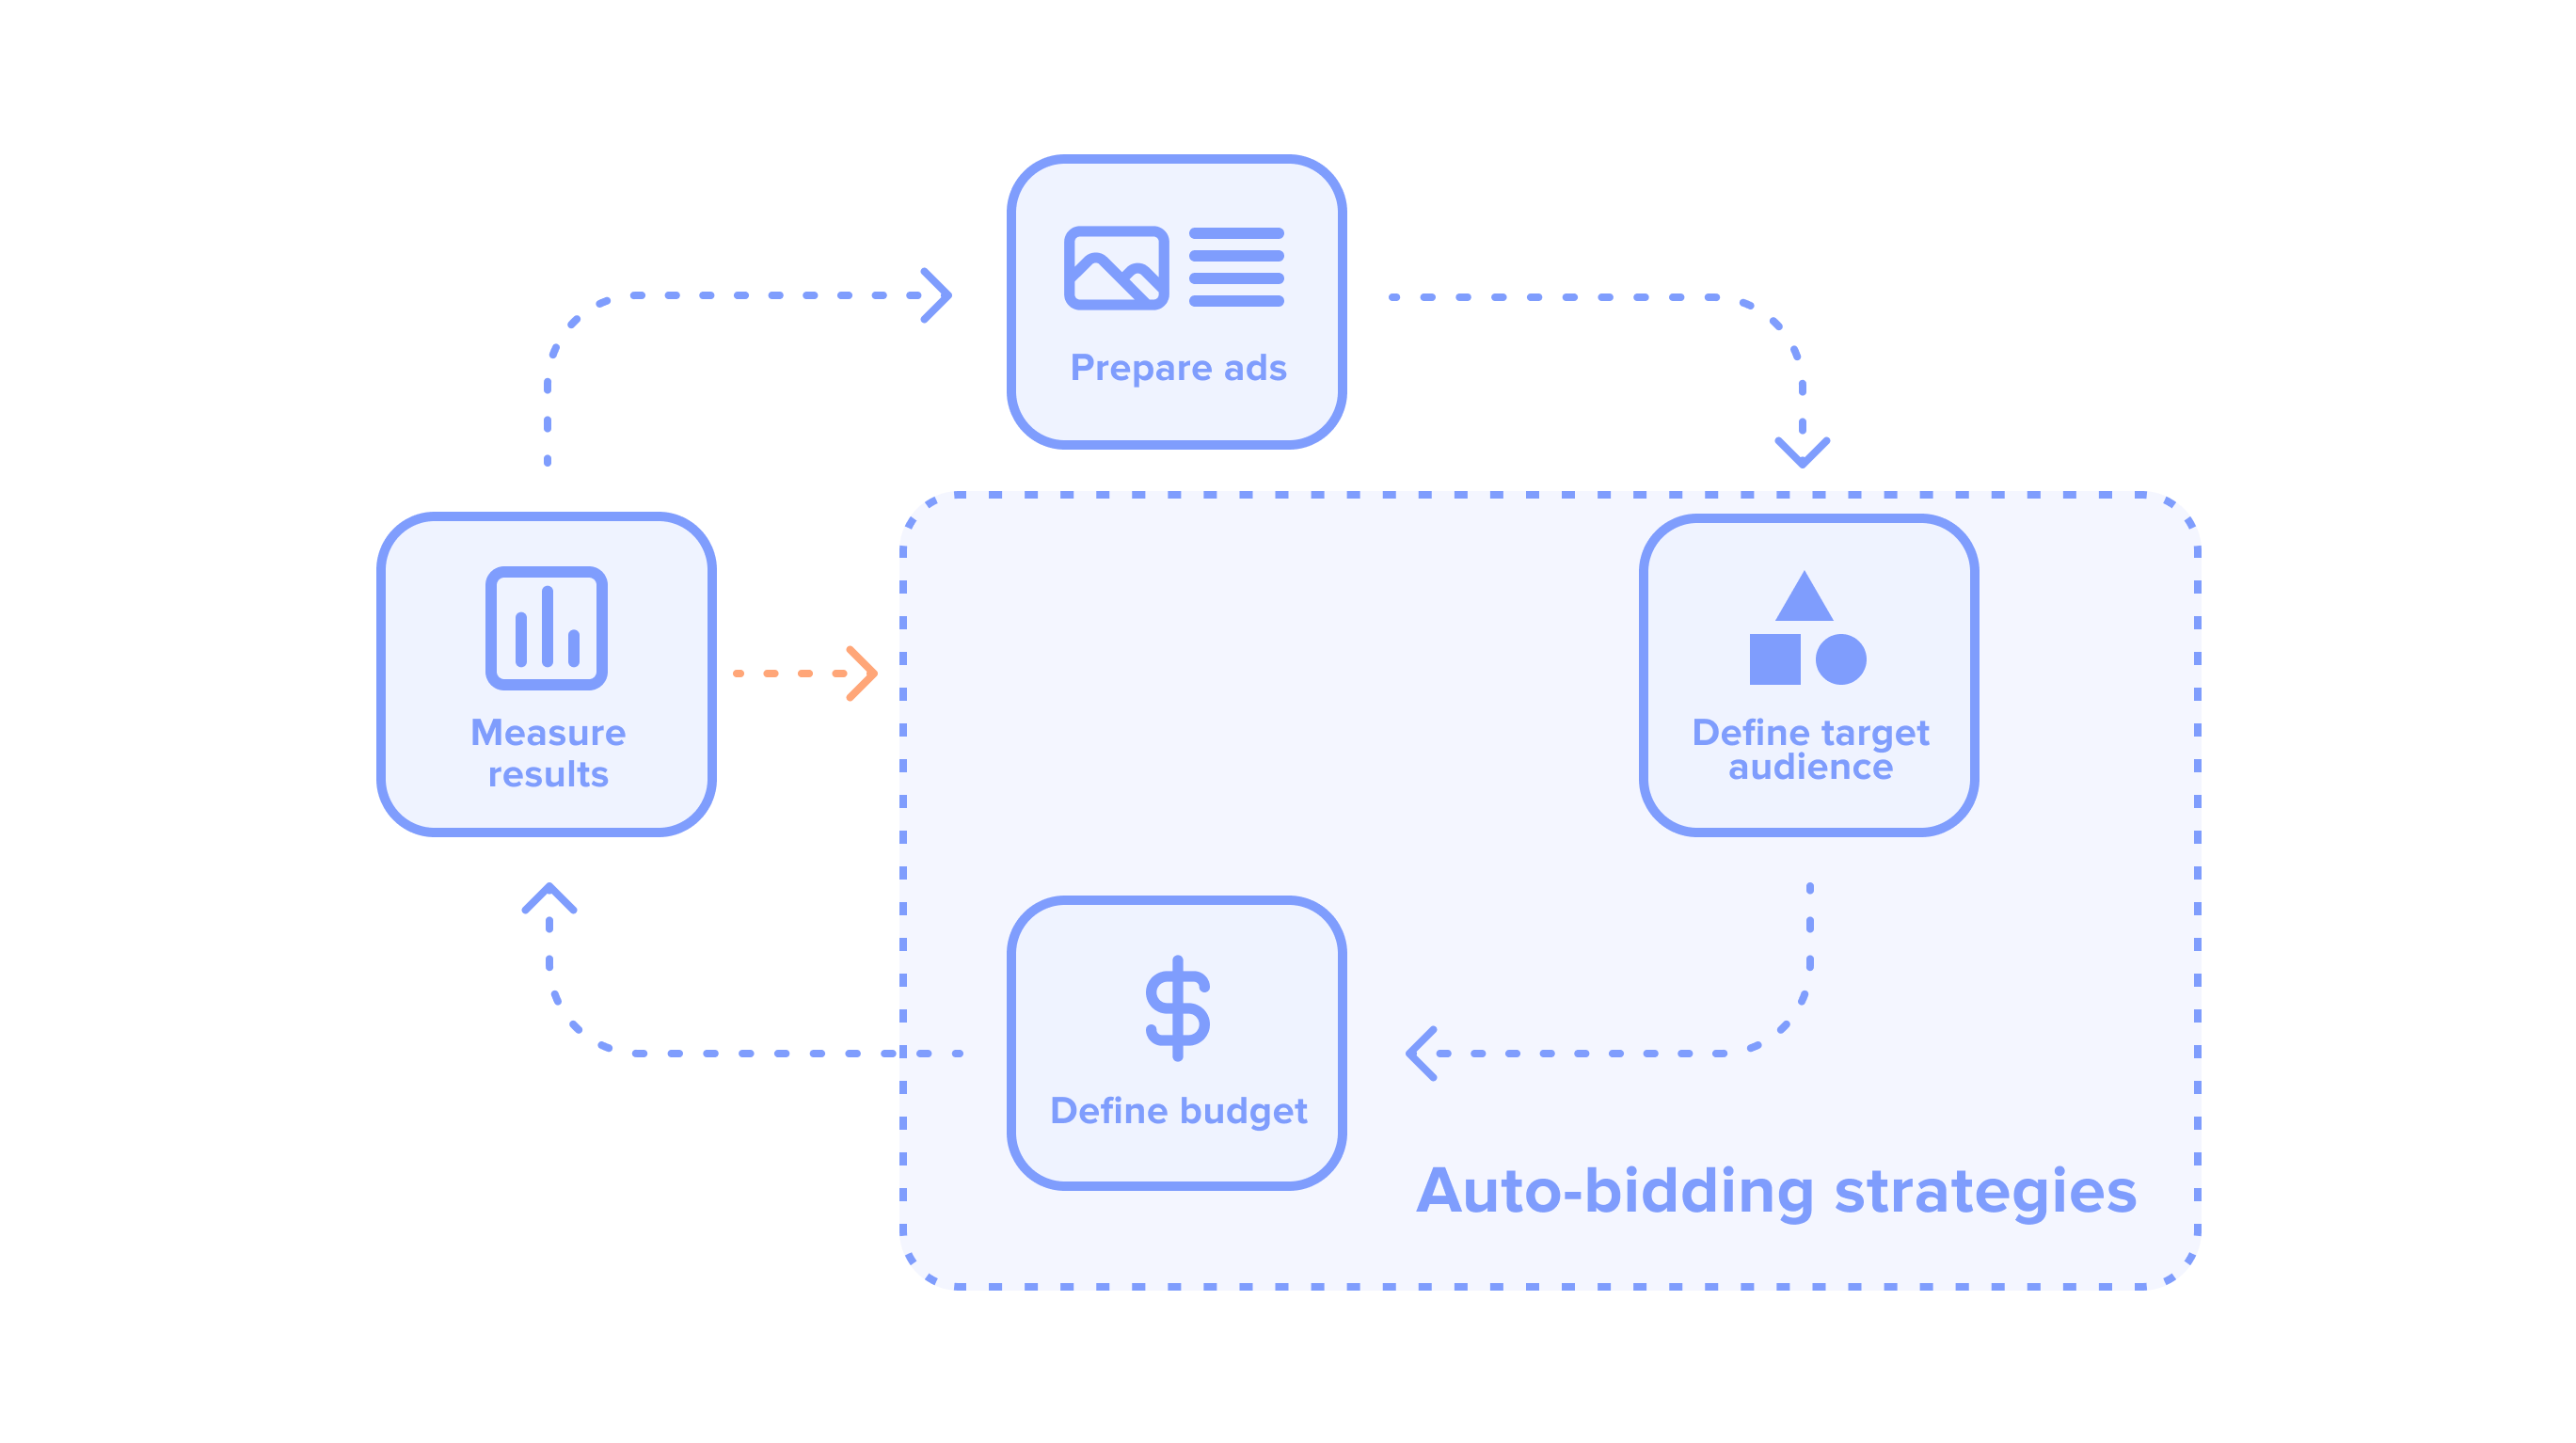 Machine learning and AI in marketing attribution solutions - automating bidding and targeting